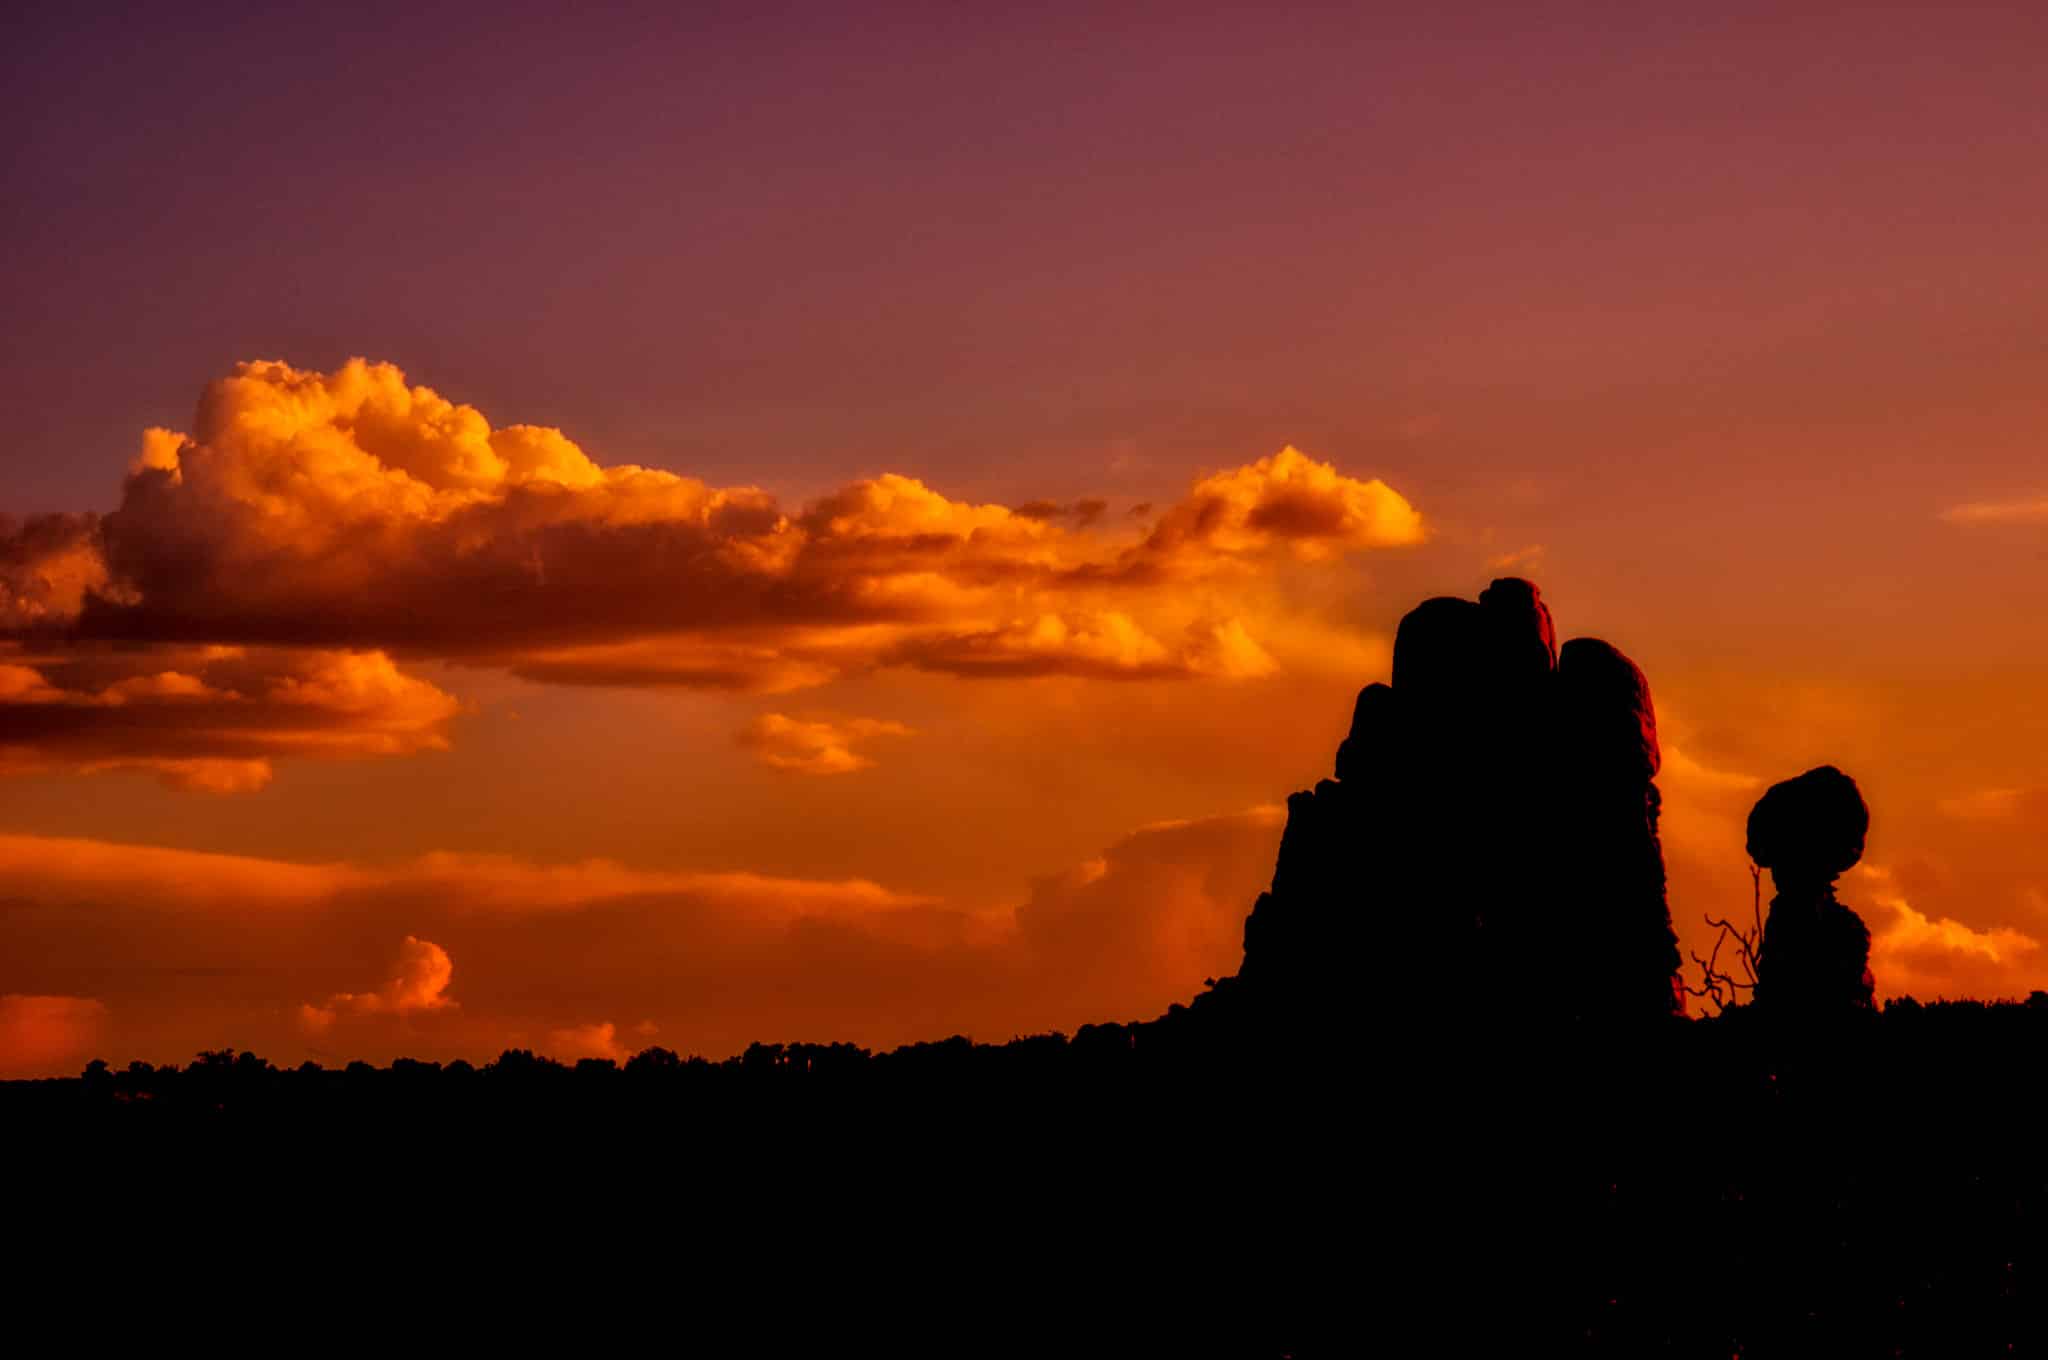 Balanced Rock at sunset in Arches National Park near Moab, Utah.